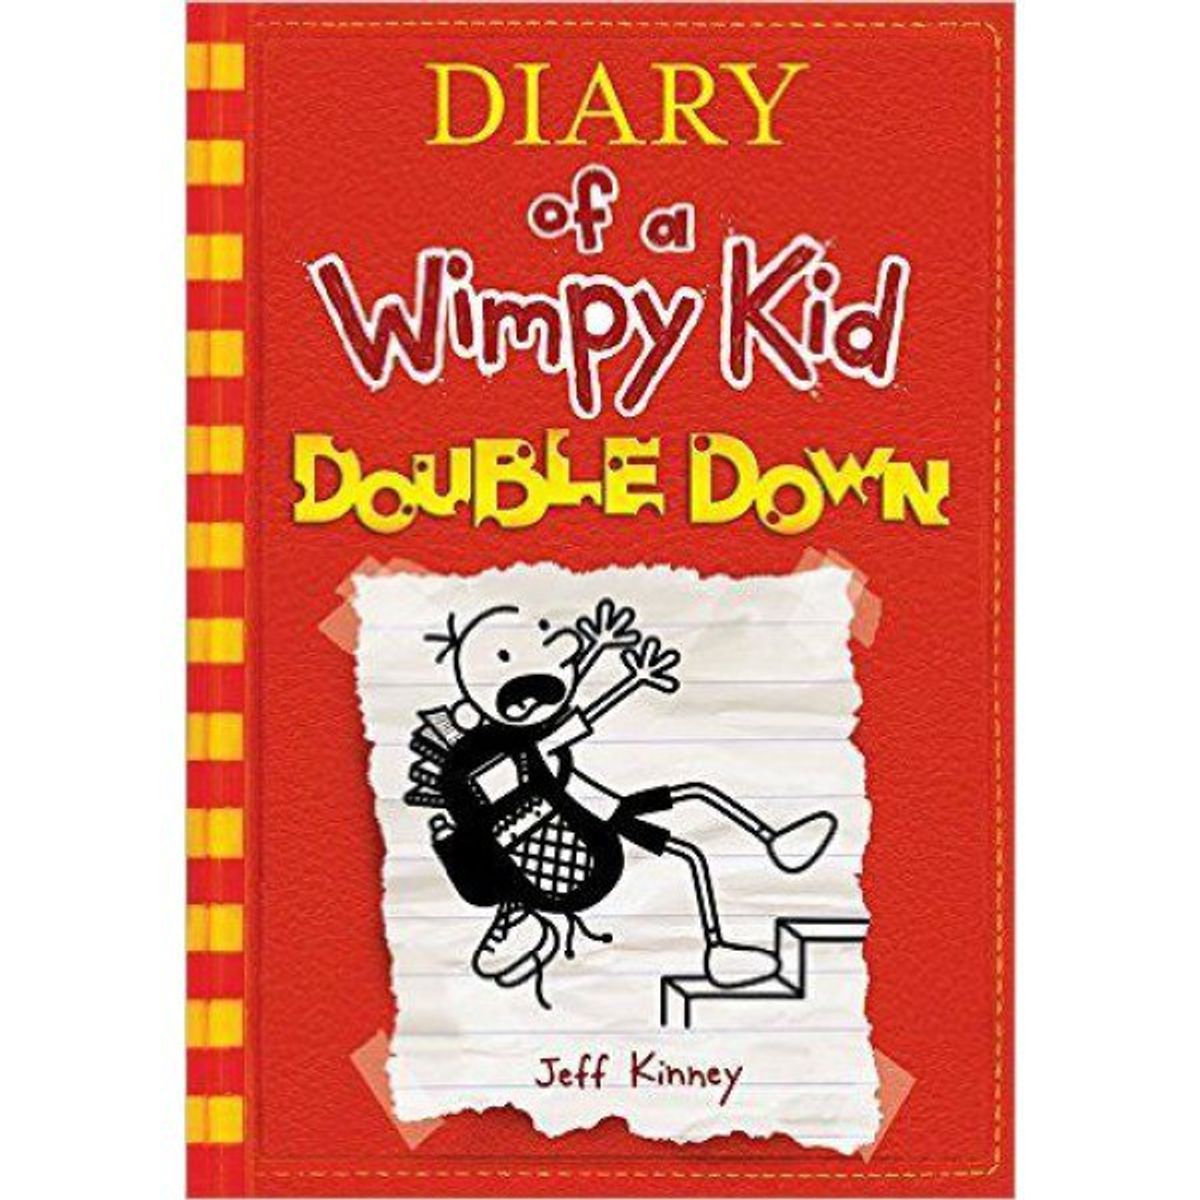 The Rise and Fall of Diary of a Wimpy Kid